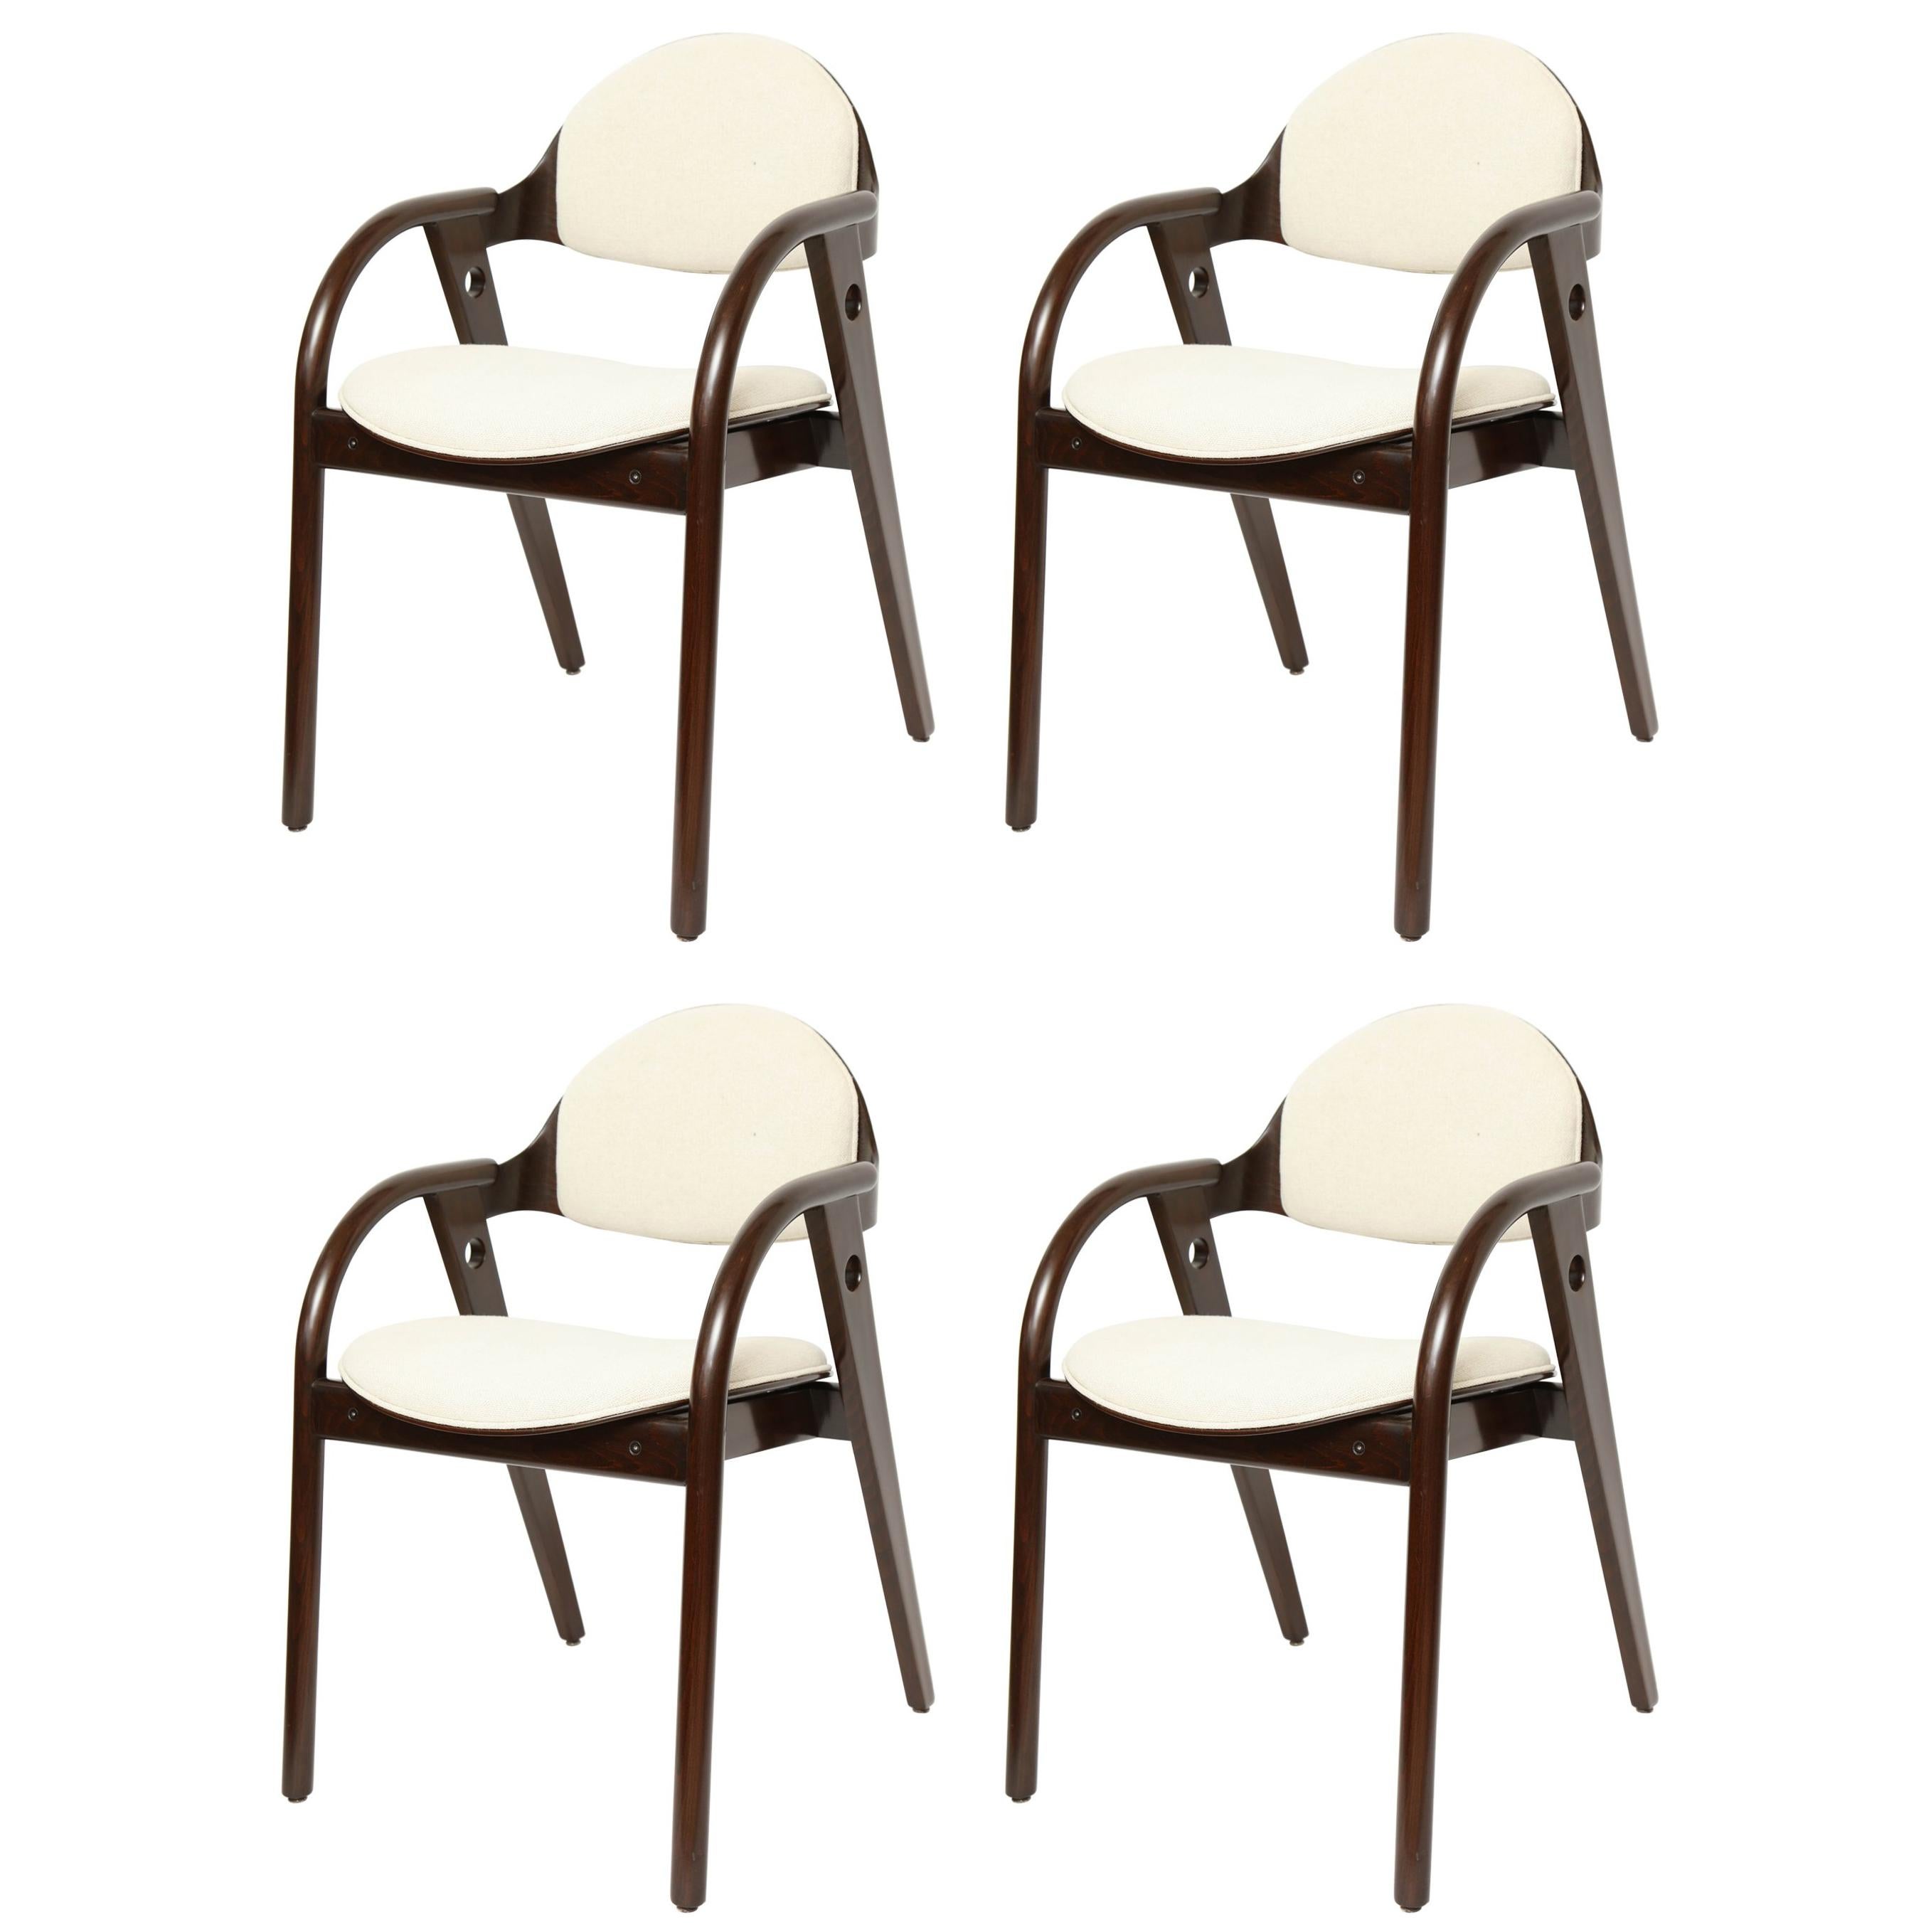 Set of Four Mid-Century Modern Dark Wood Chairs with Upholstered Seats For Sale